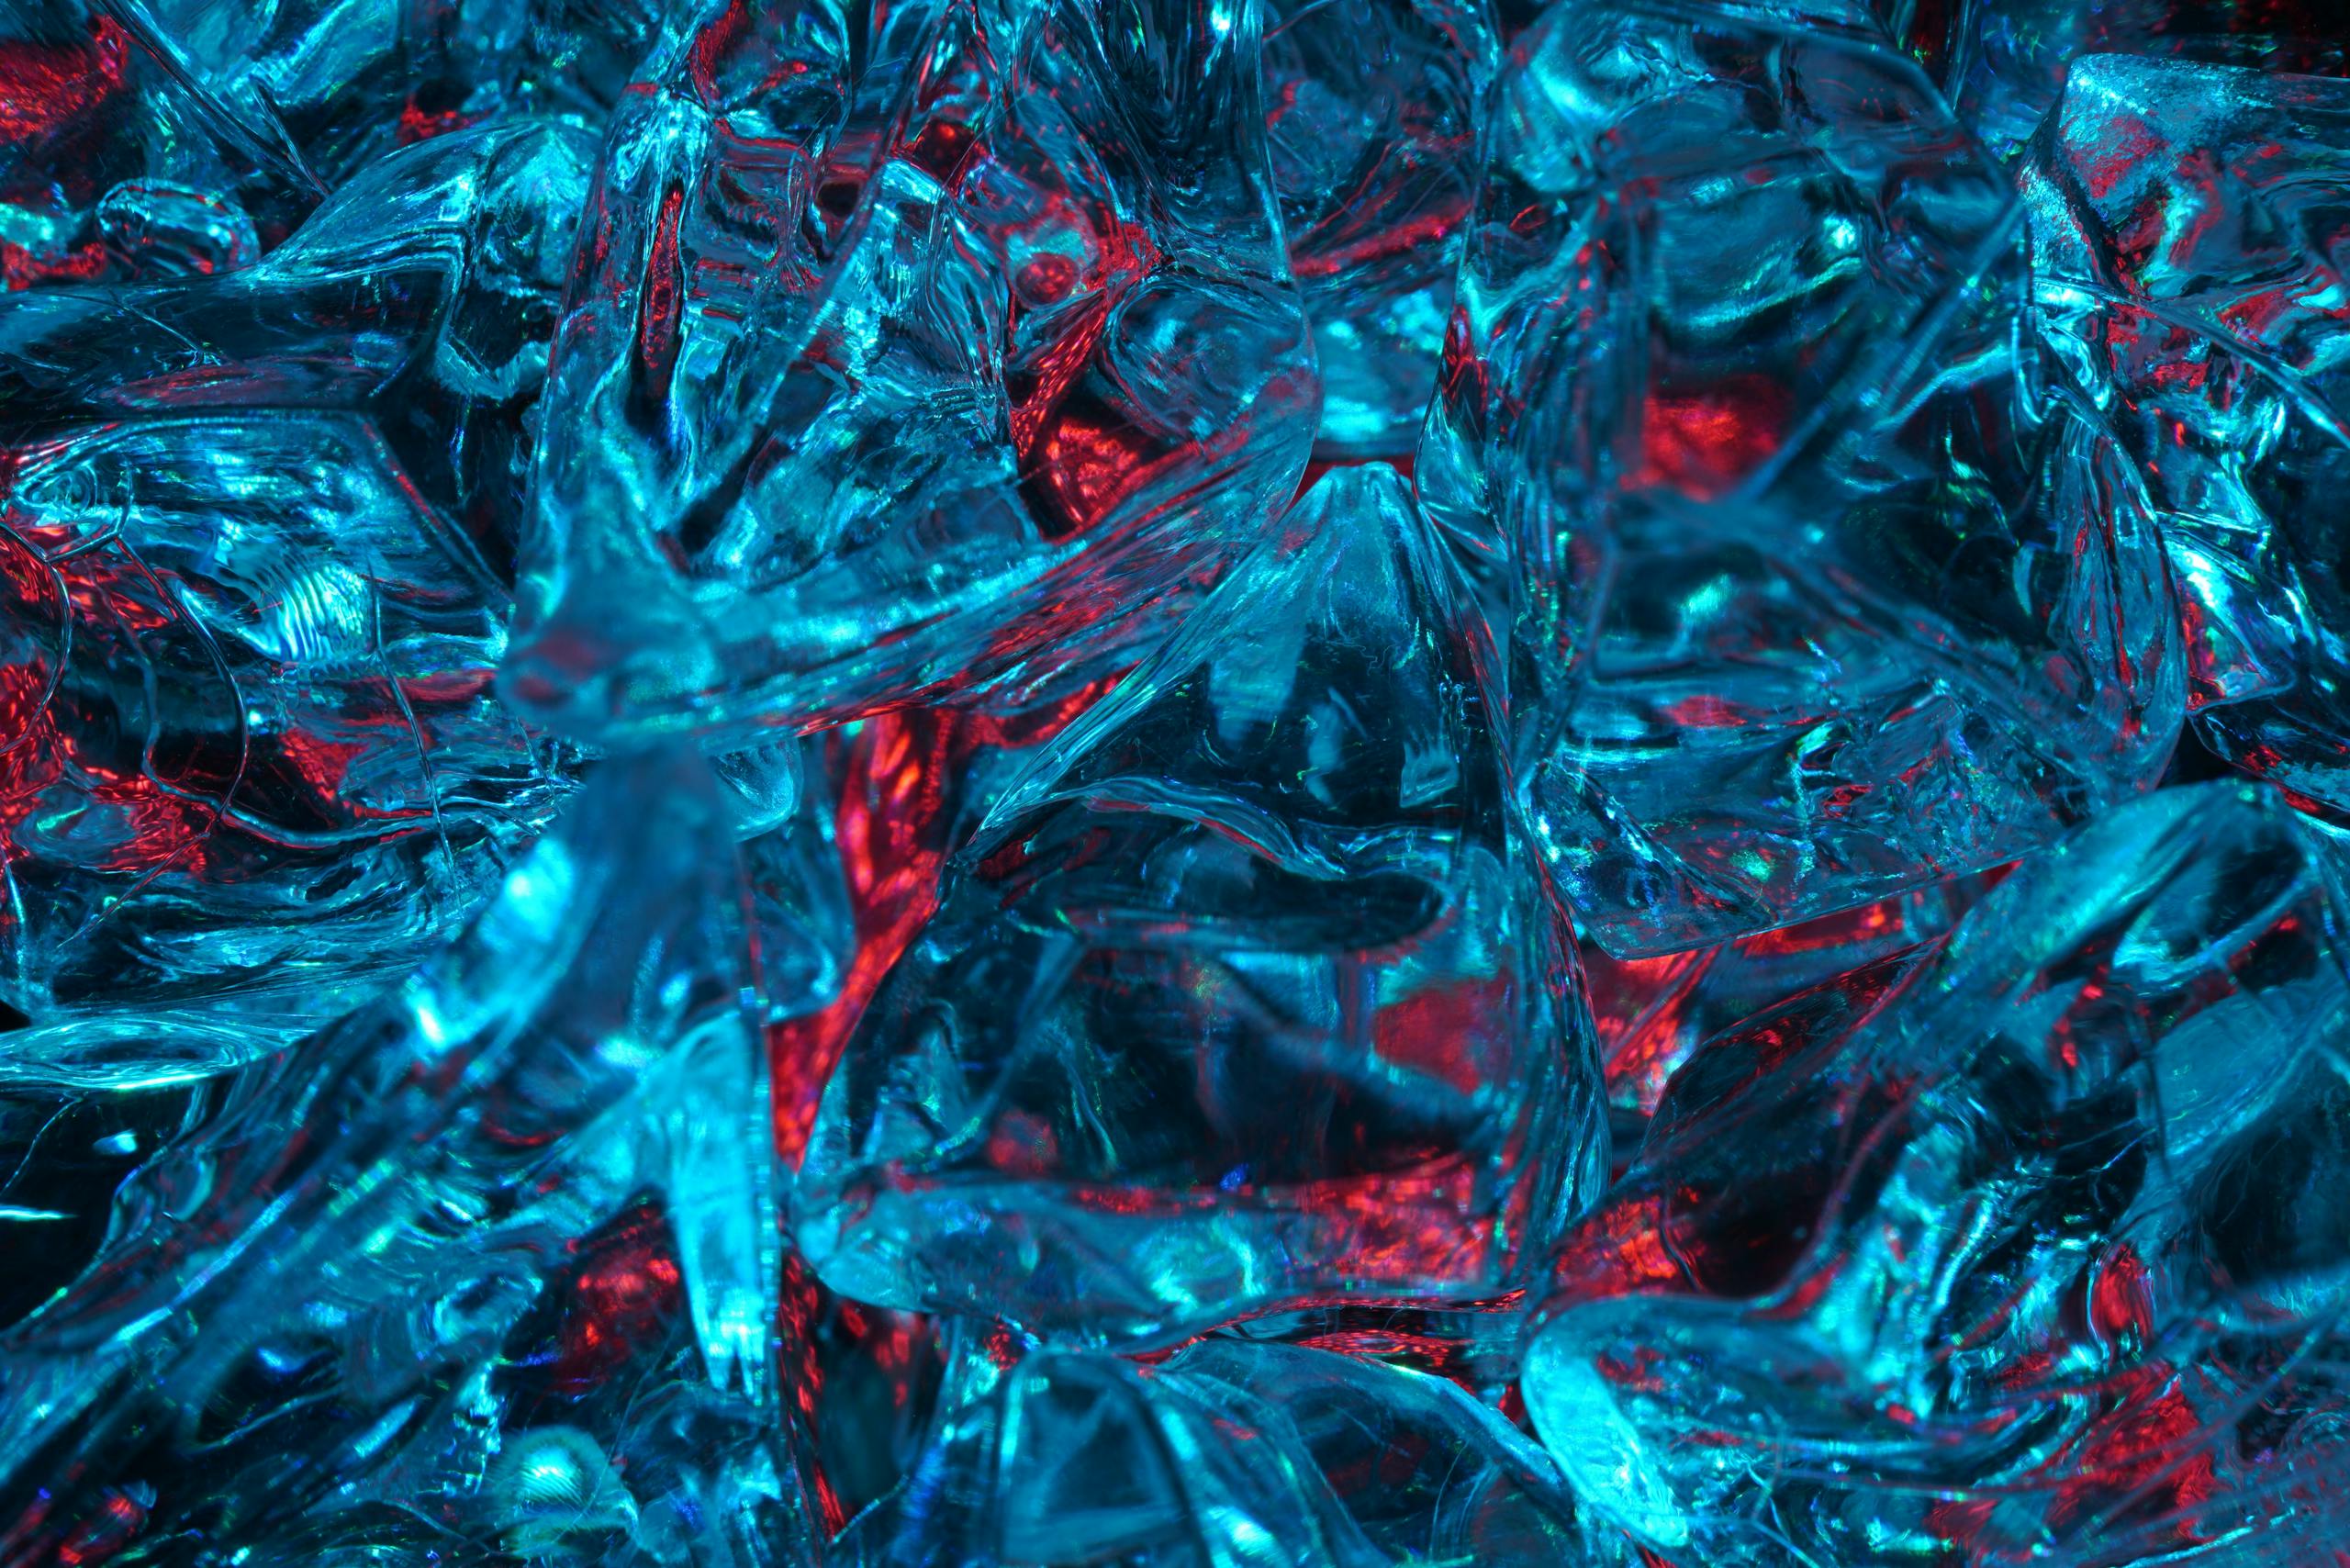 Crystalline blue and red ice